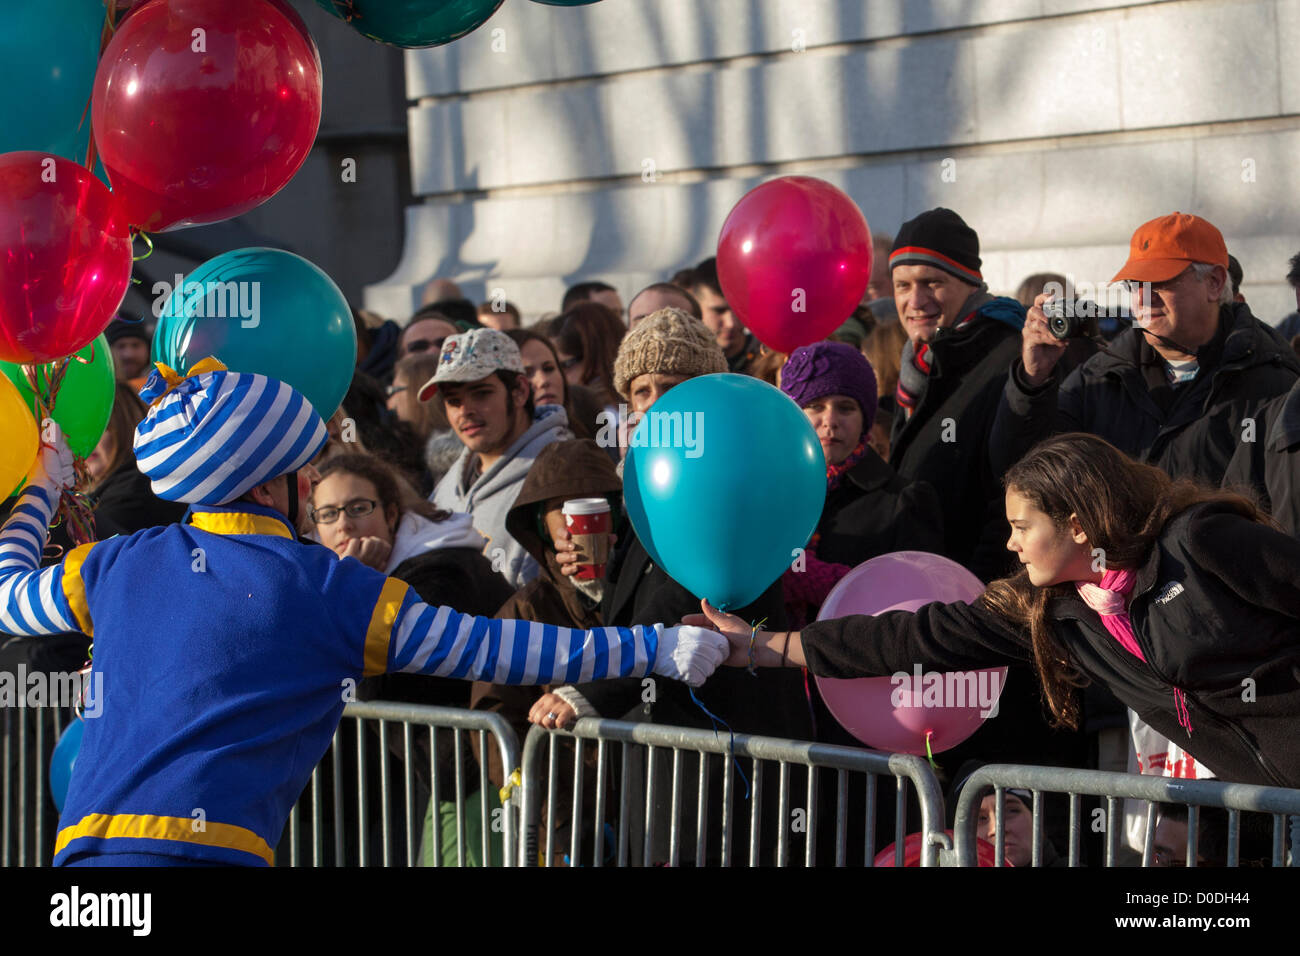 Clown handing out balloons to spectators at Macy's Thanksgiving Day Parade in New York City, on Thursday, Nov. 22, 2012. Stock Photo